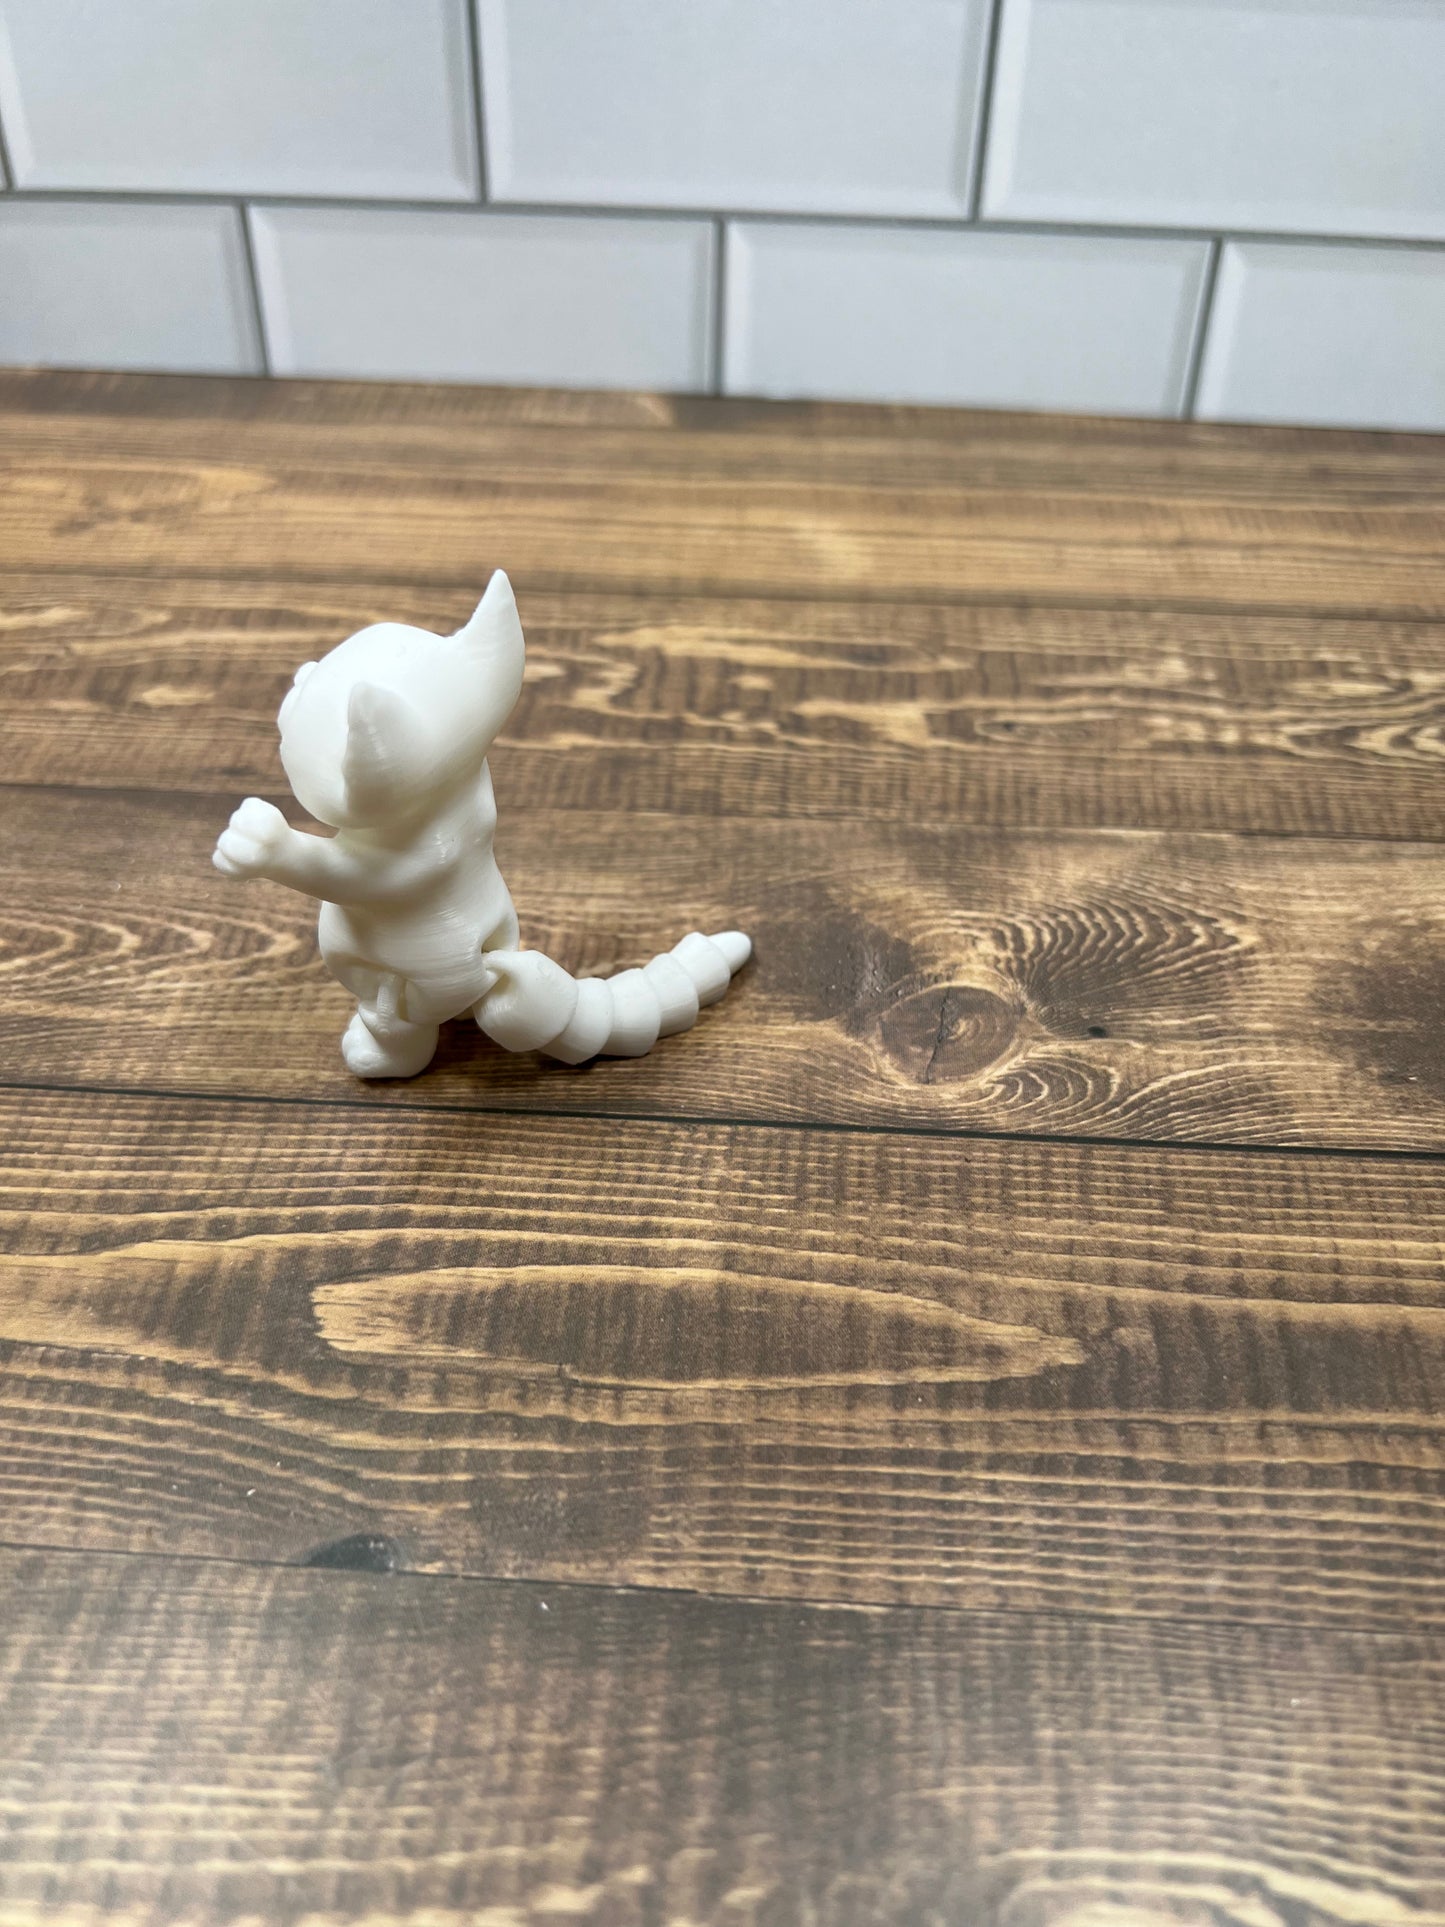 3D Printed Articulated Boo Kitty Decoration